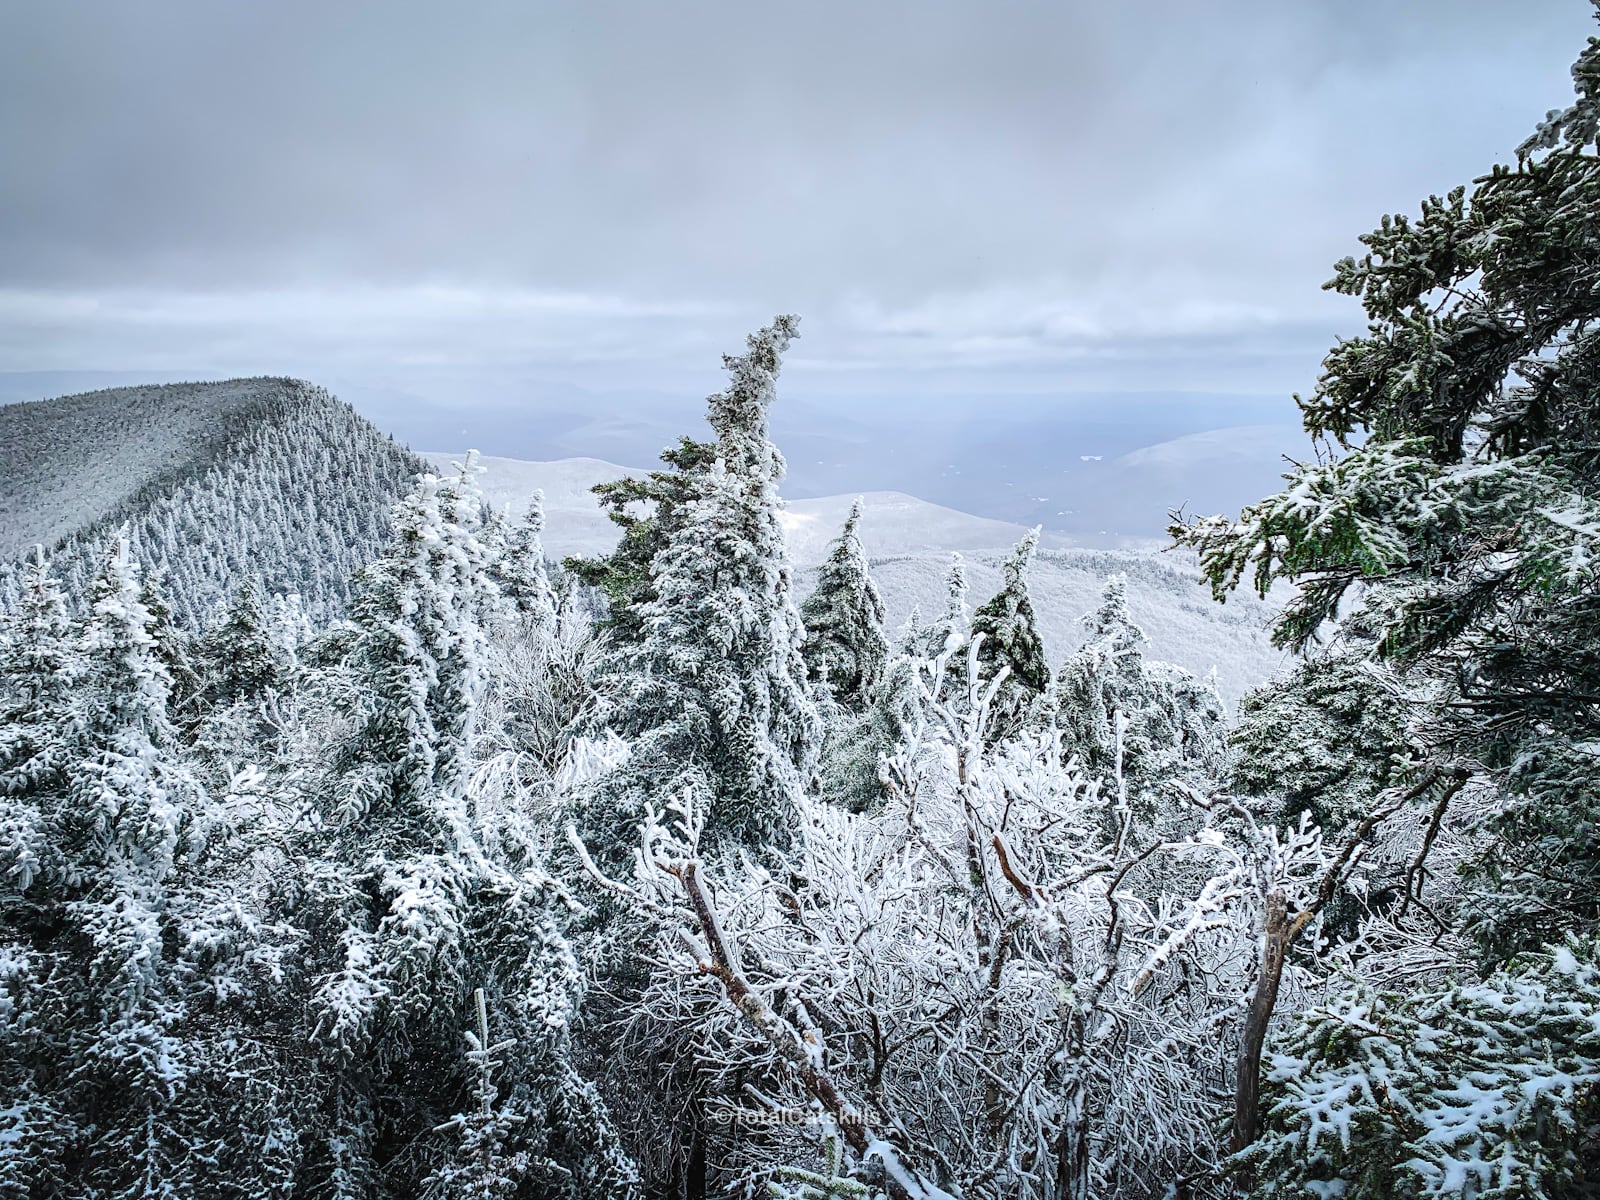 snowy mountain summit and frozen evergreen trees on a winter hike